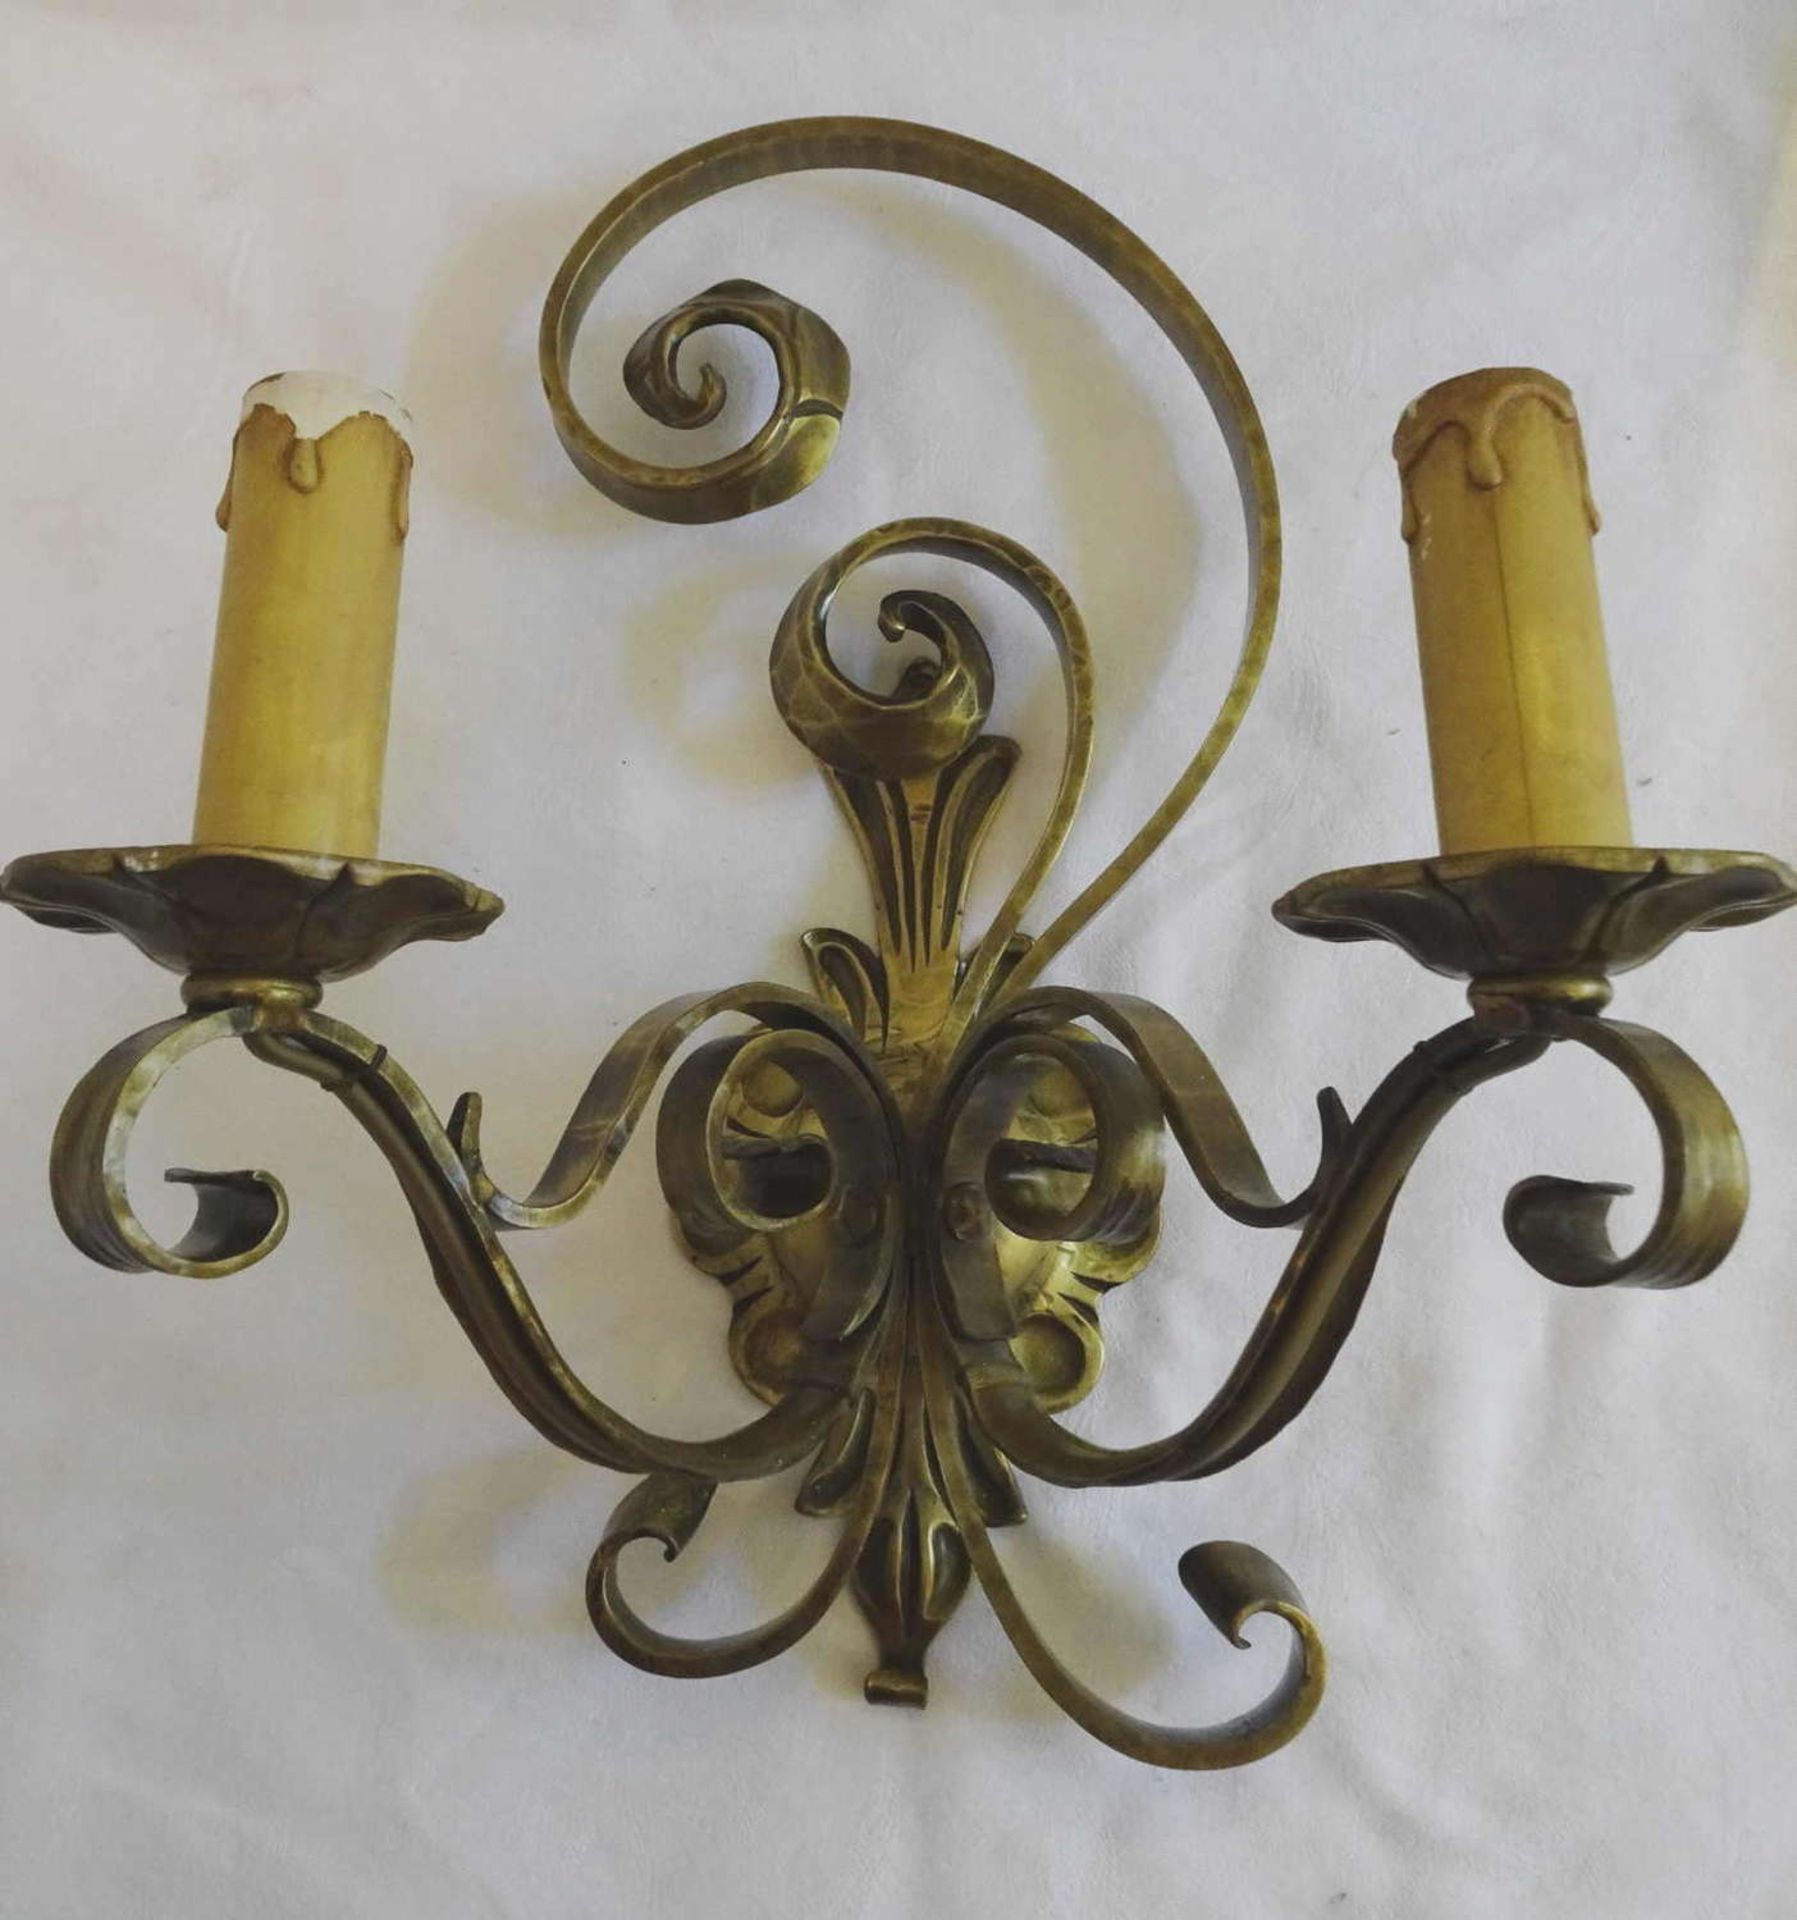 10 brass sconces from the old household. Electrified. Please visit!